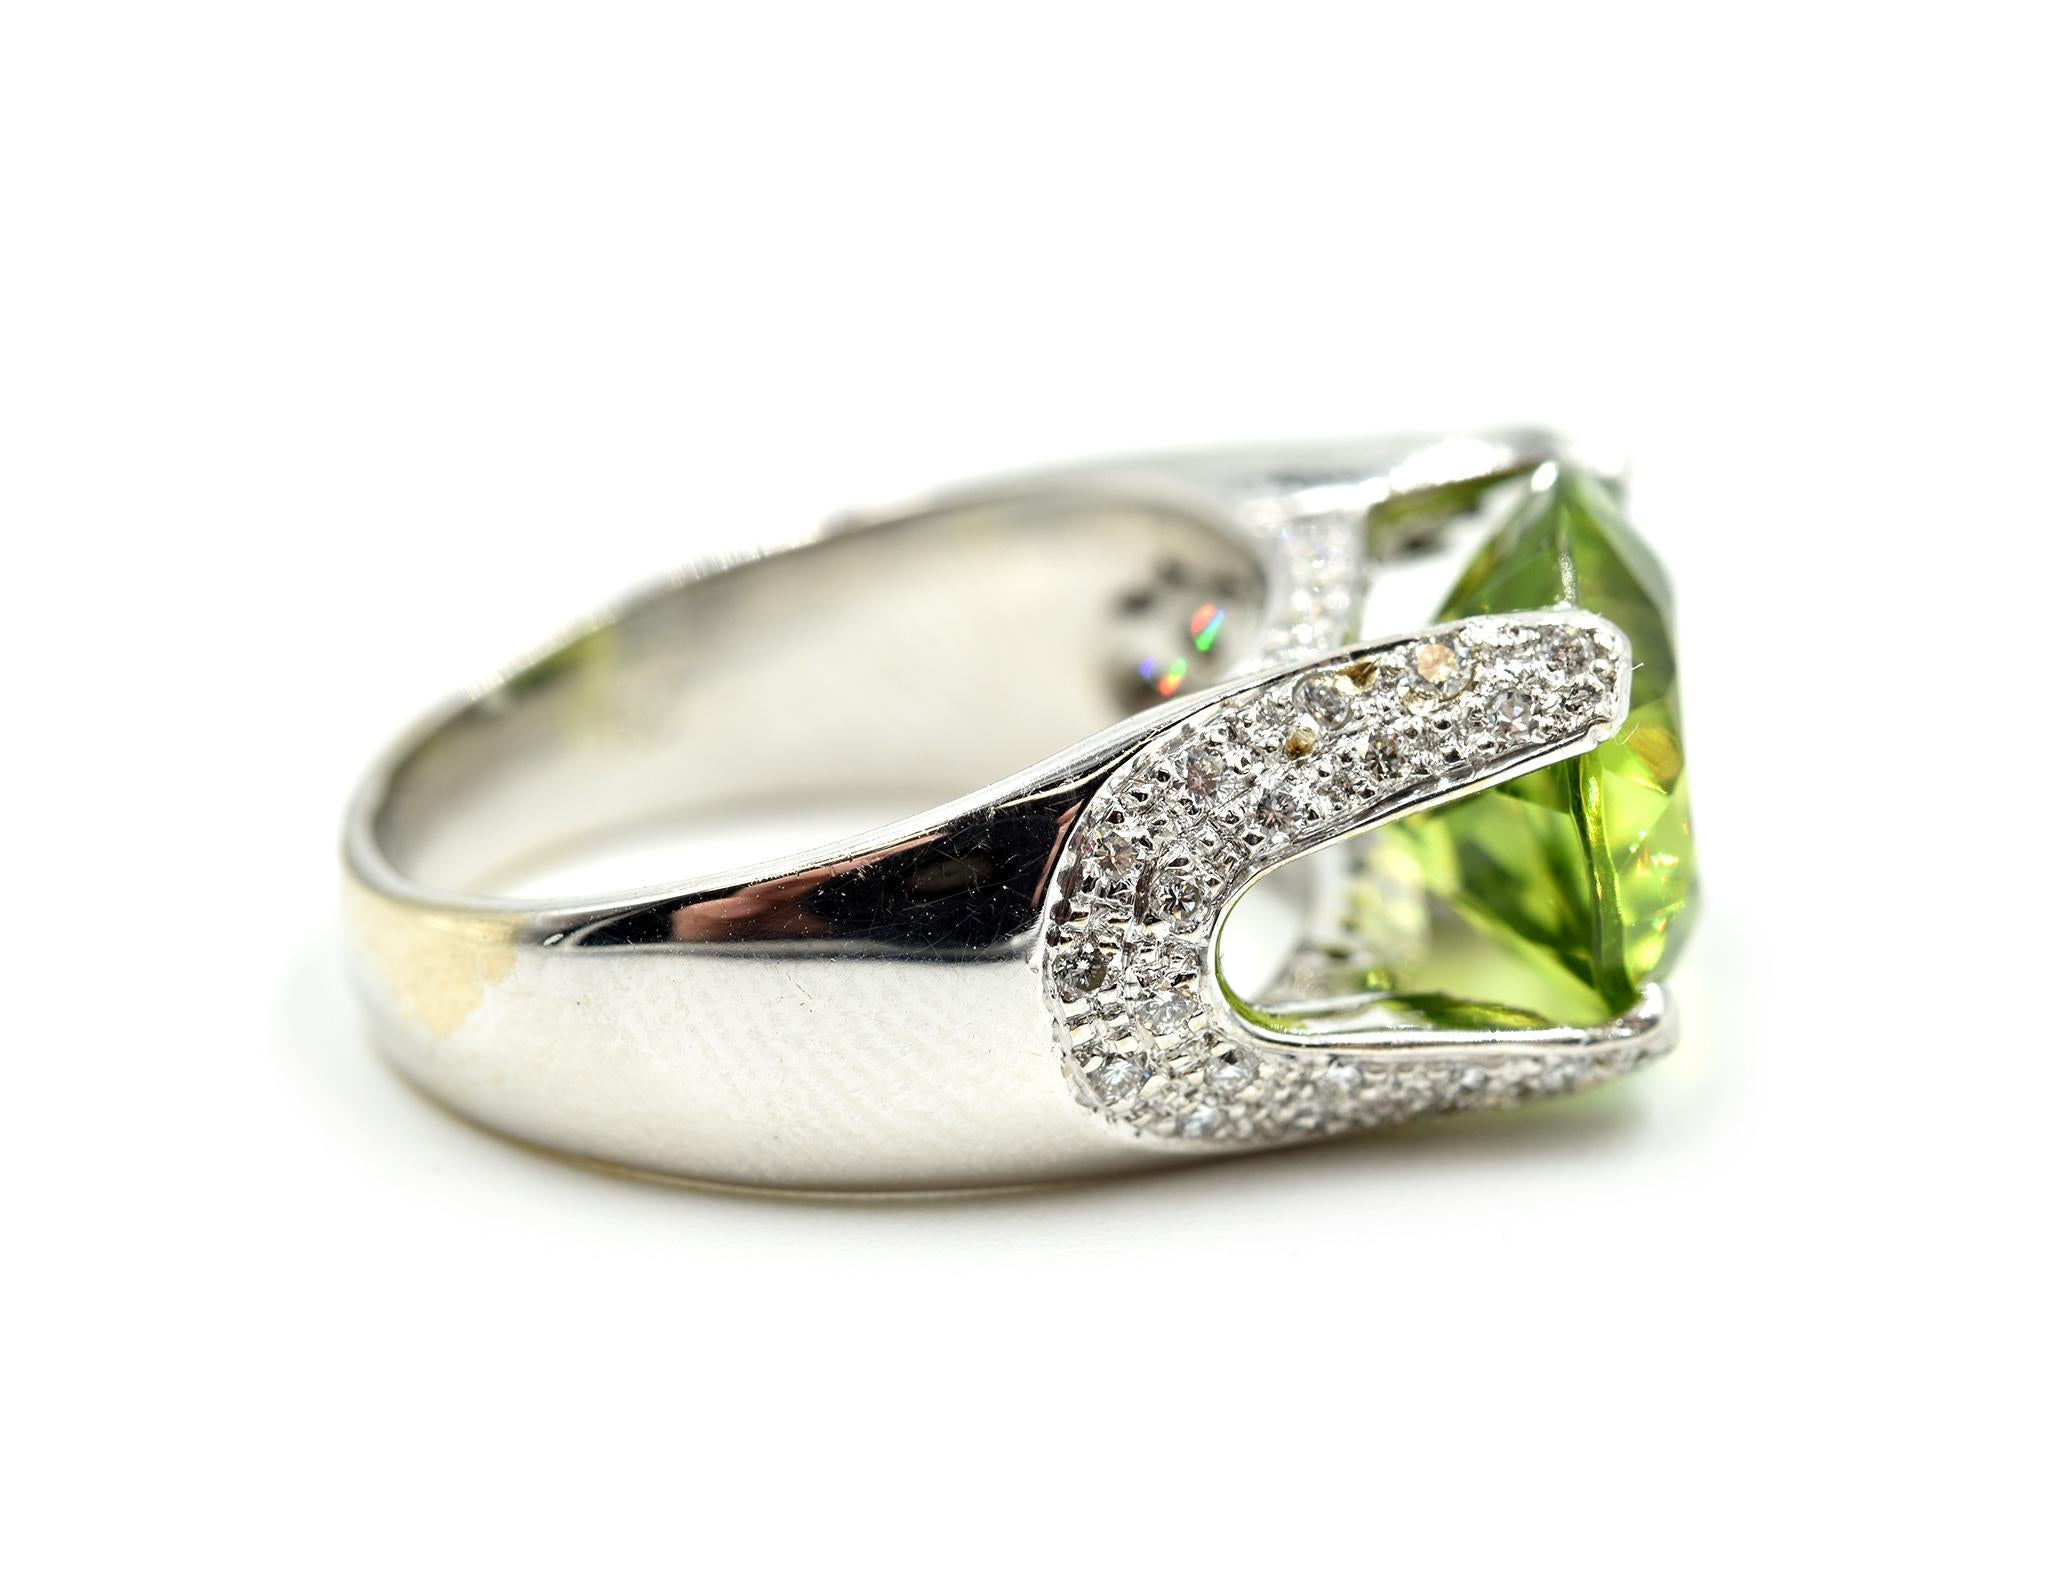 Designer: custom design
Material: 18k white gold
Peridot: 1.31 carat oval cut peridot gemstone
Diamonds: 42 round brilliant cuts = 0.21 carat total weight
Dimensions: band is 1/2 inch long
Ring Size: 5 ½ 
Weight: 8.00 grams
